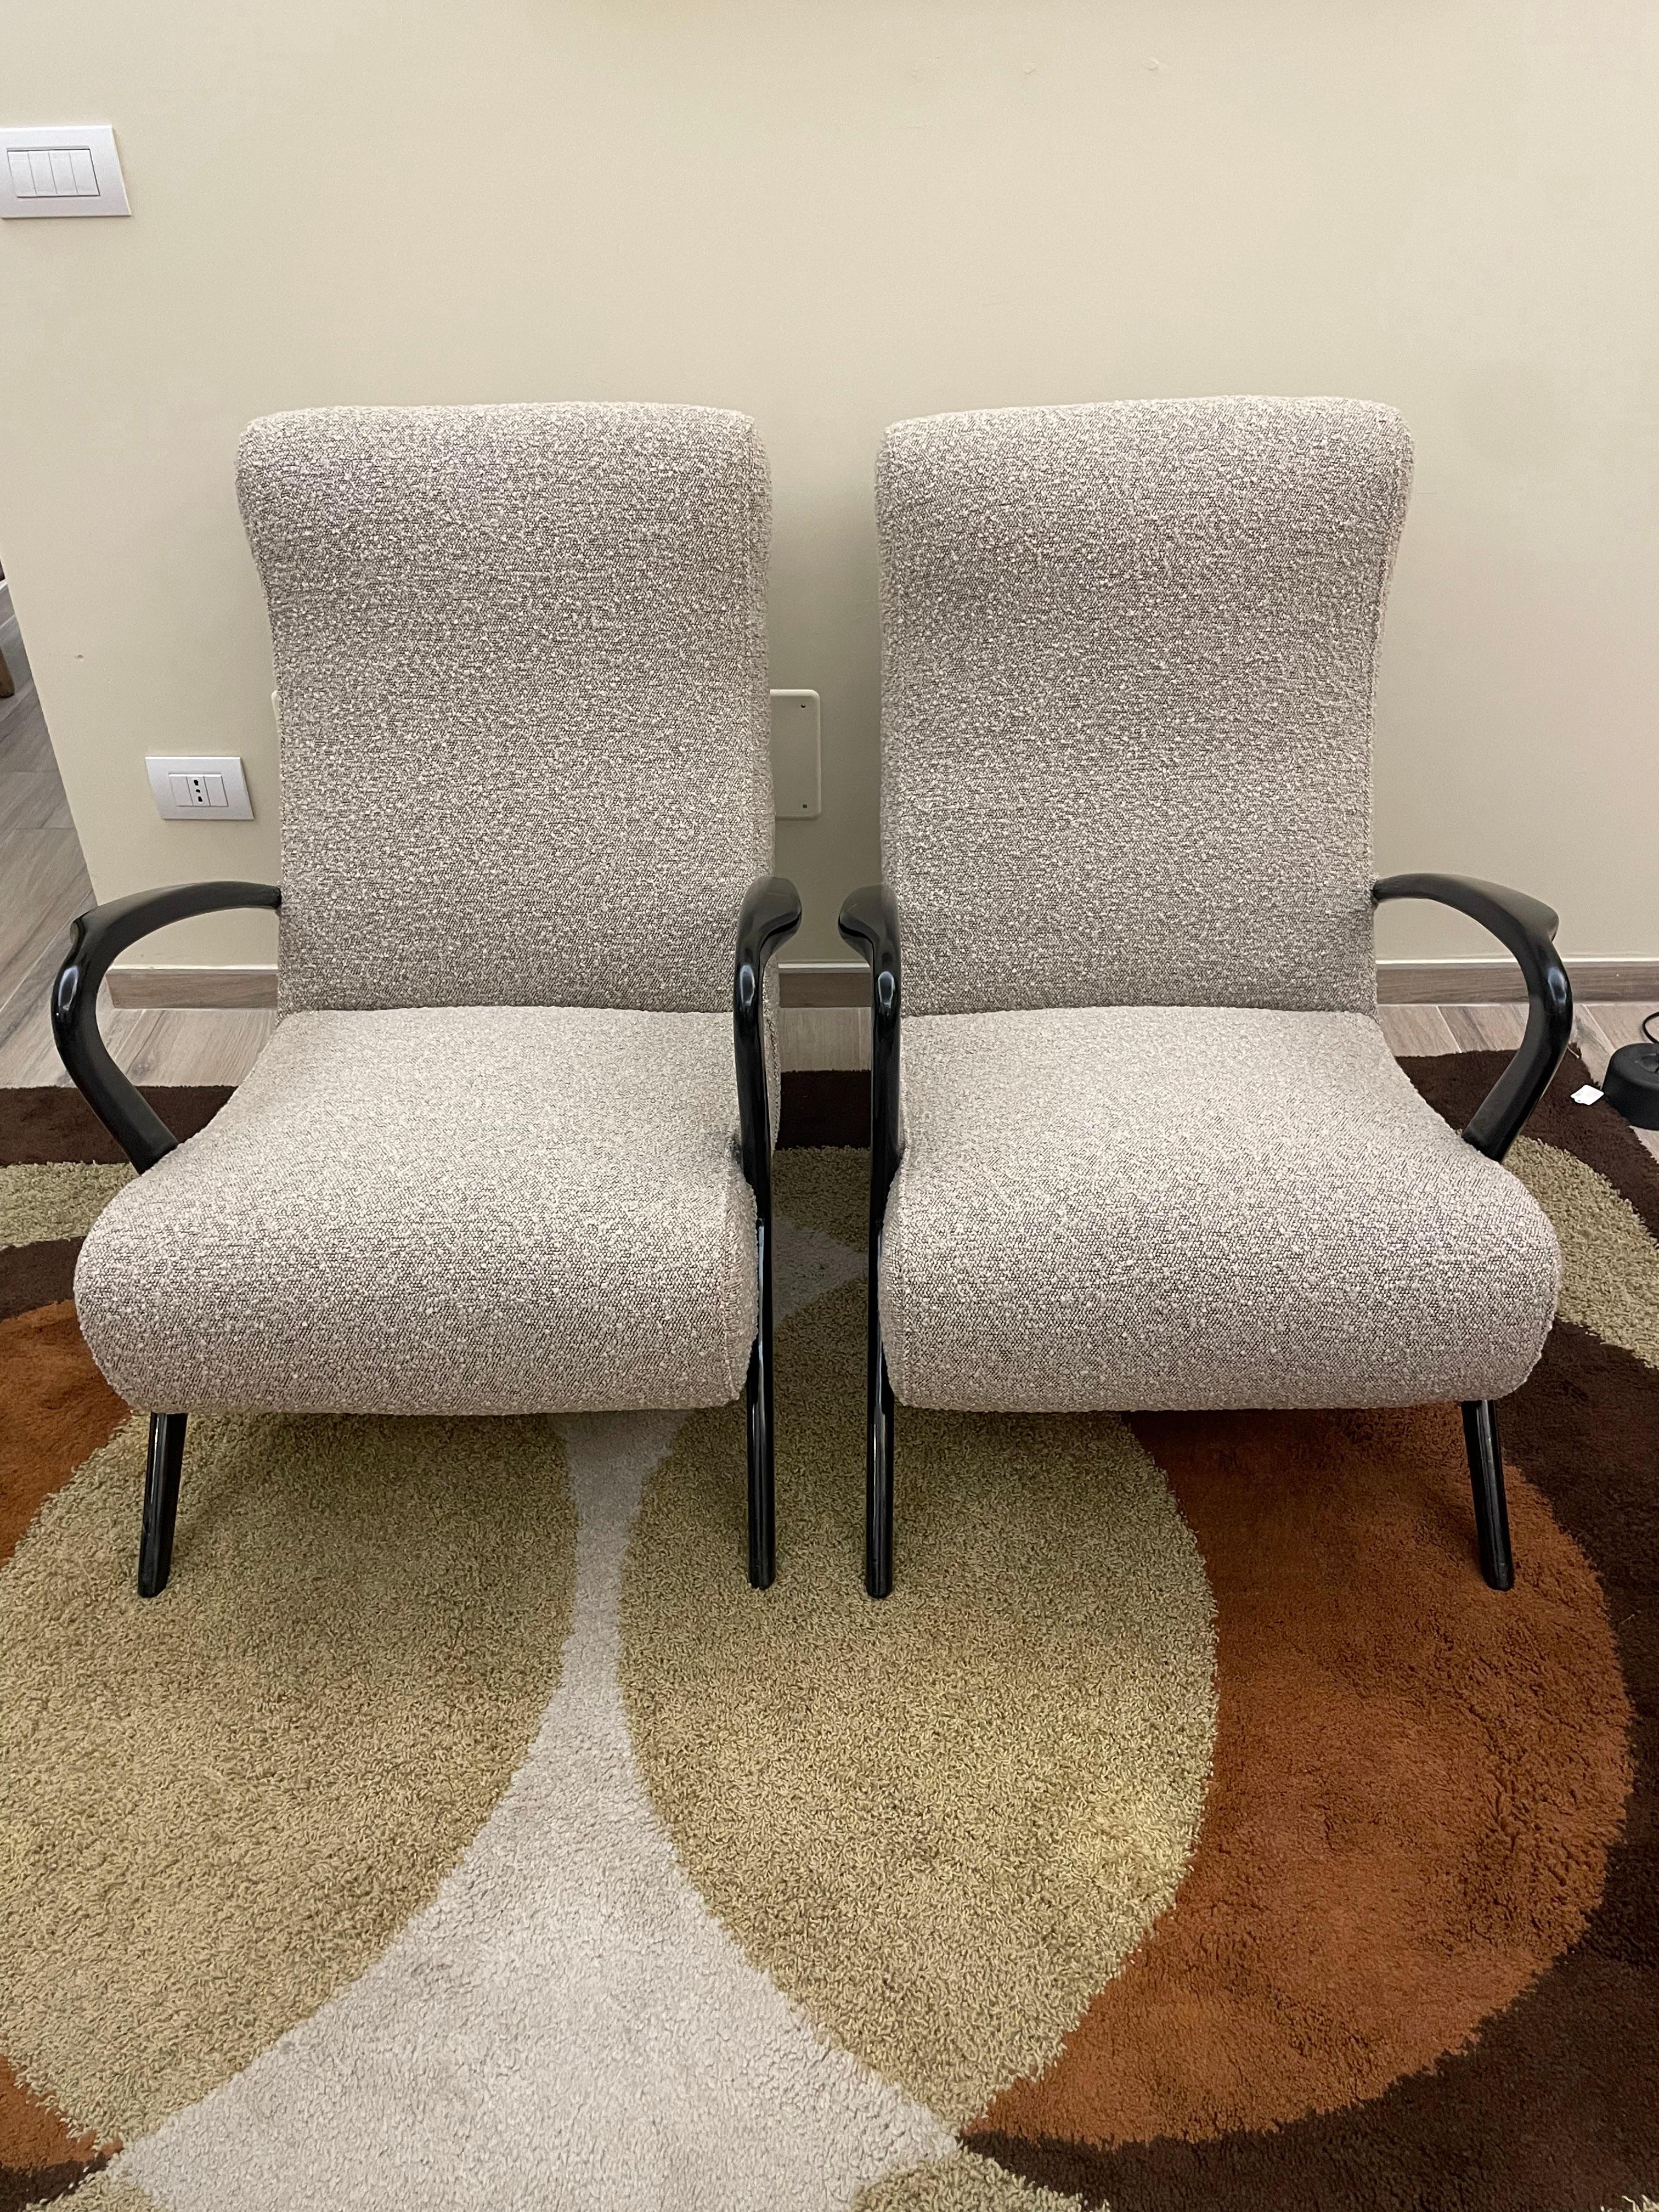 20th Century Pair of armchairs from the 1950s-60s For Sale